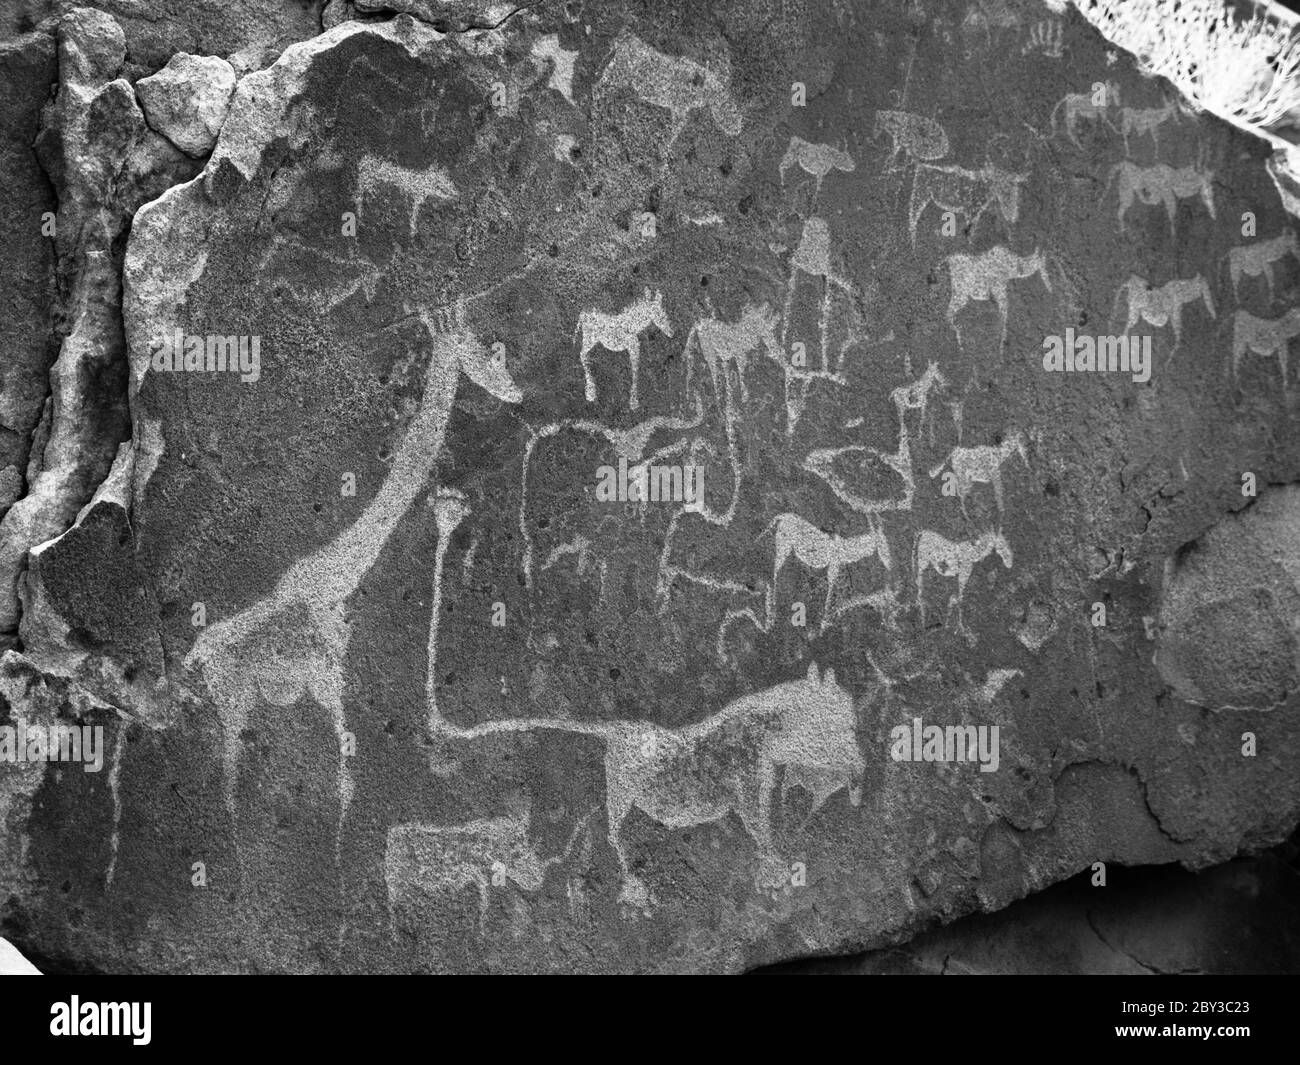 Prehistoric Bushman engravings - Lion Plate with Lion Man and other animals and symbols, Twyfelfontein, Namibia. Black and white image. Stock Photo